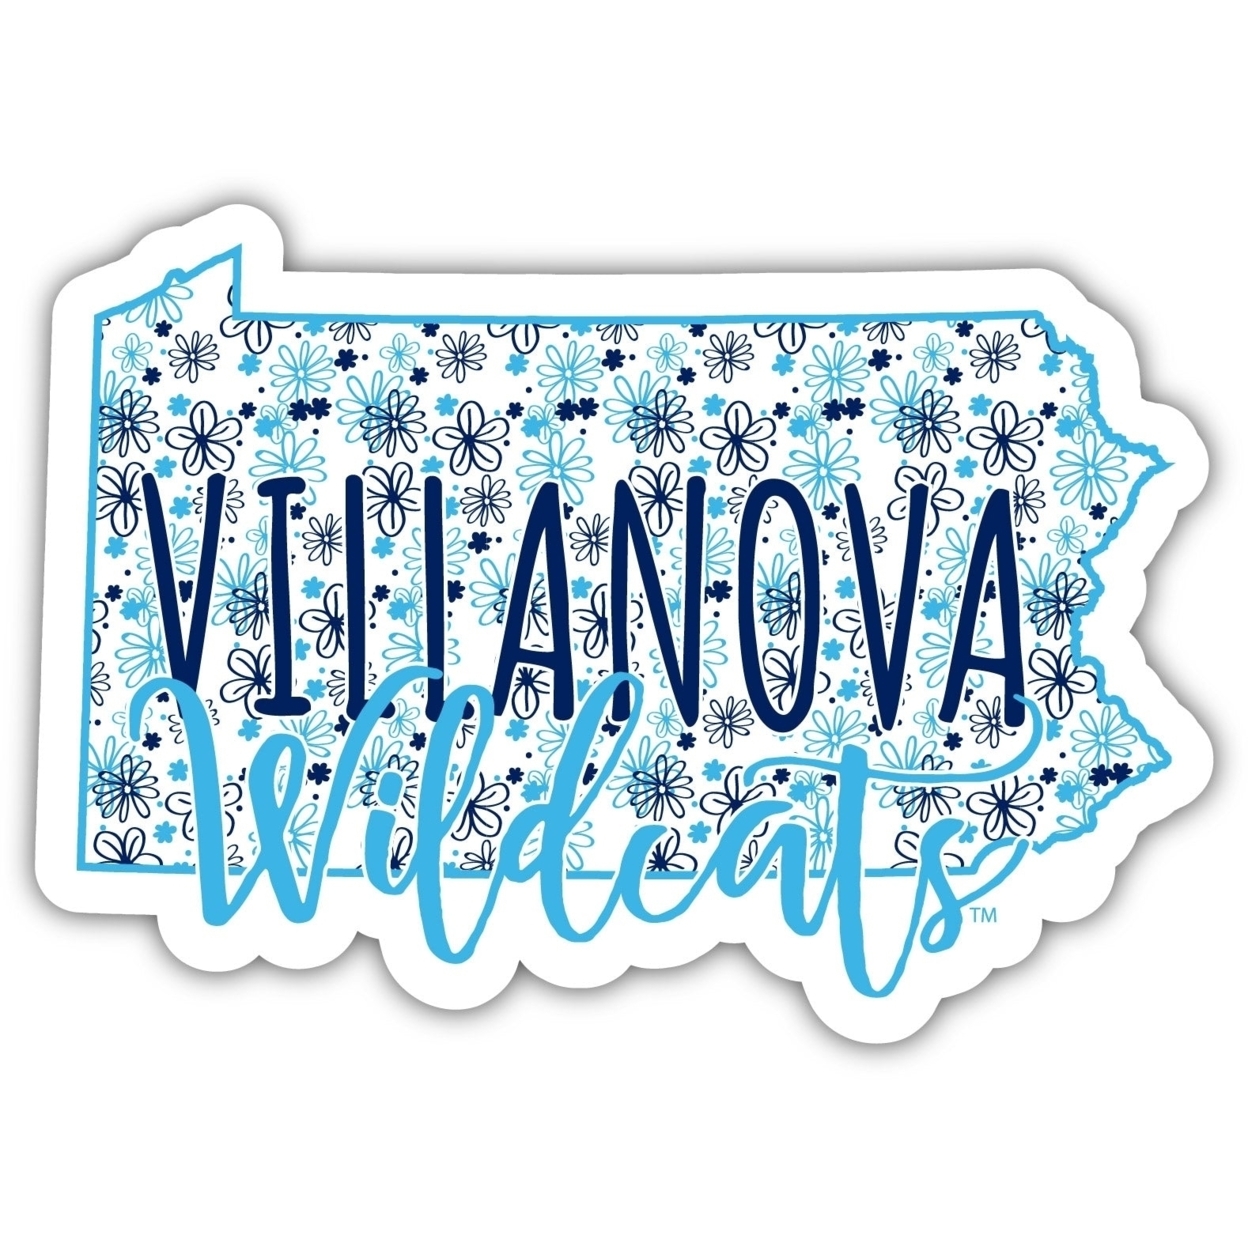 Virginia Commonwealth Floral State Die Cut Decal 2-Inch